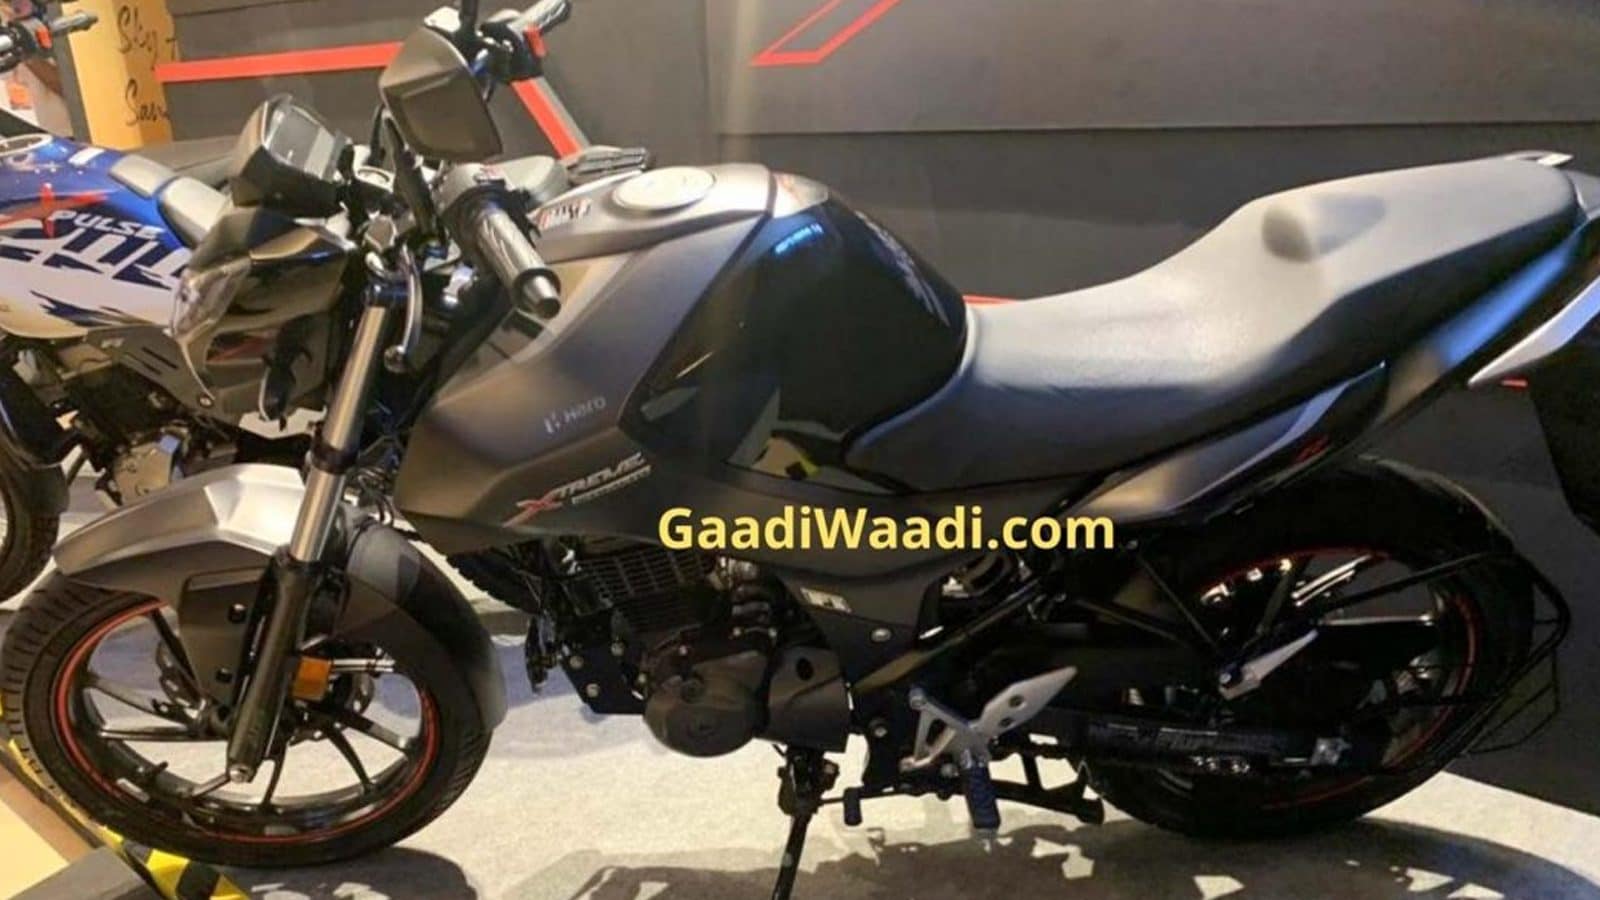 New Hero Xtreme 160r Stealth Edition Leaked Ahead Of Upcoming India Launch